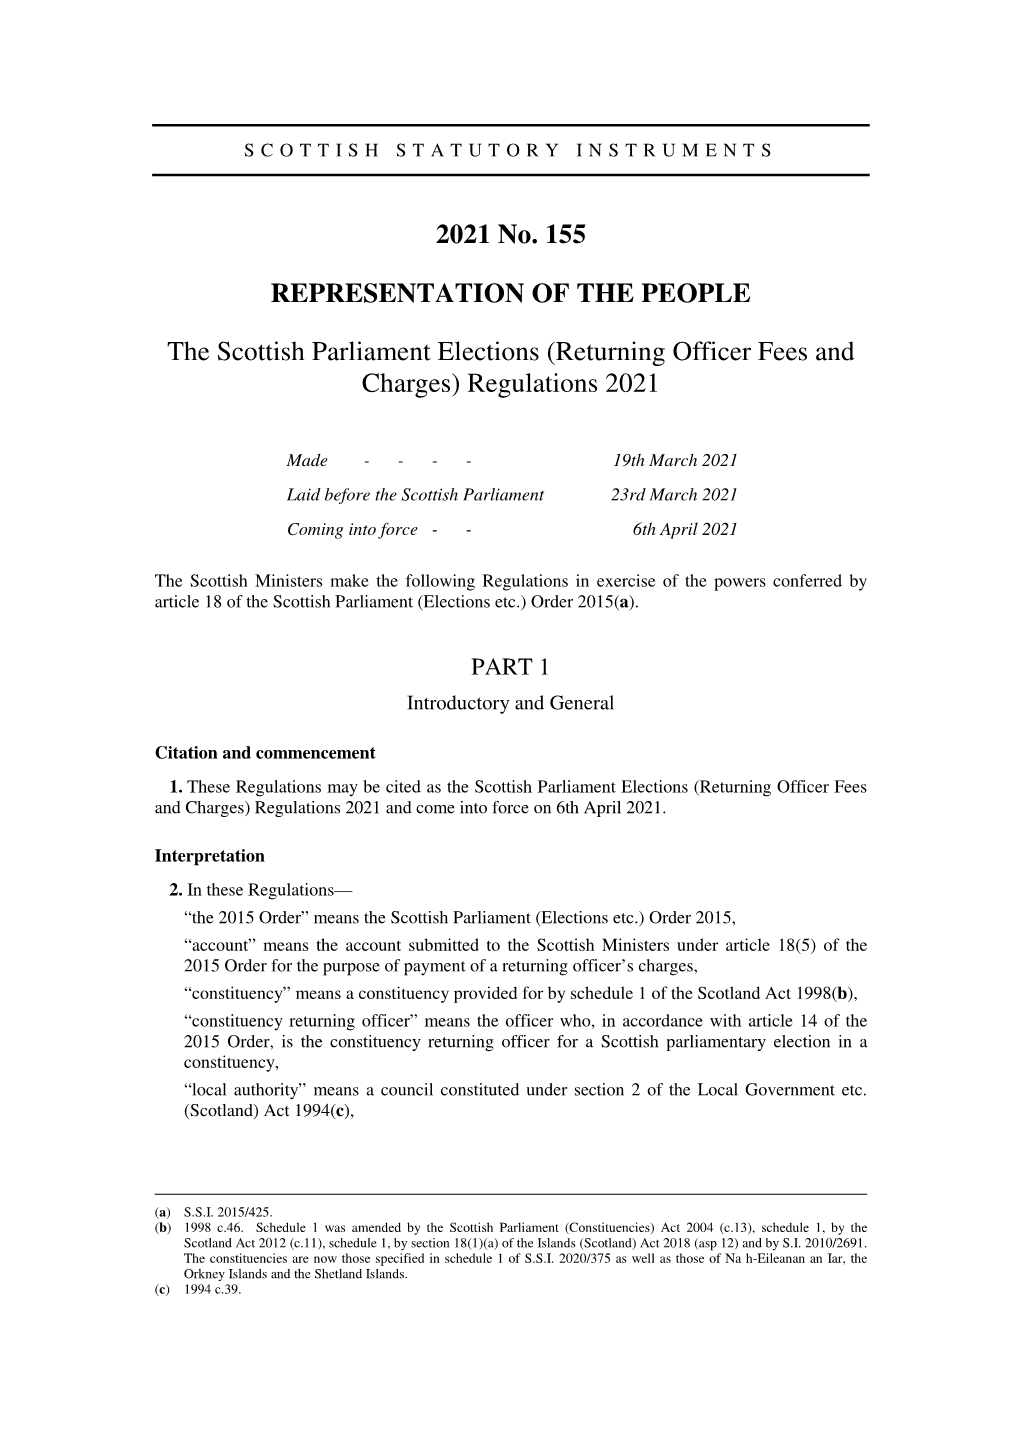 The Scottish Parliament Elections (Returning Officer Fees and Charges) Regulations 2021